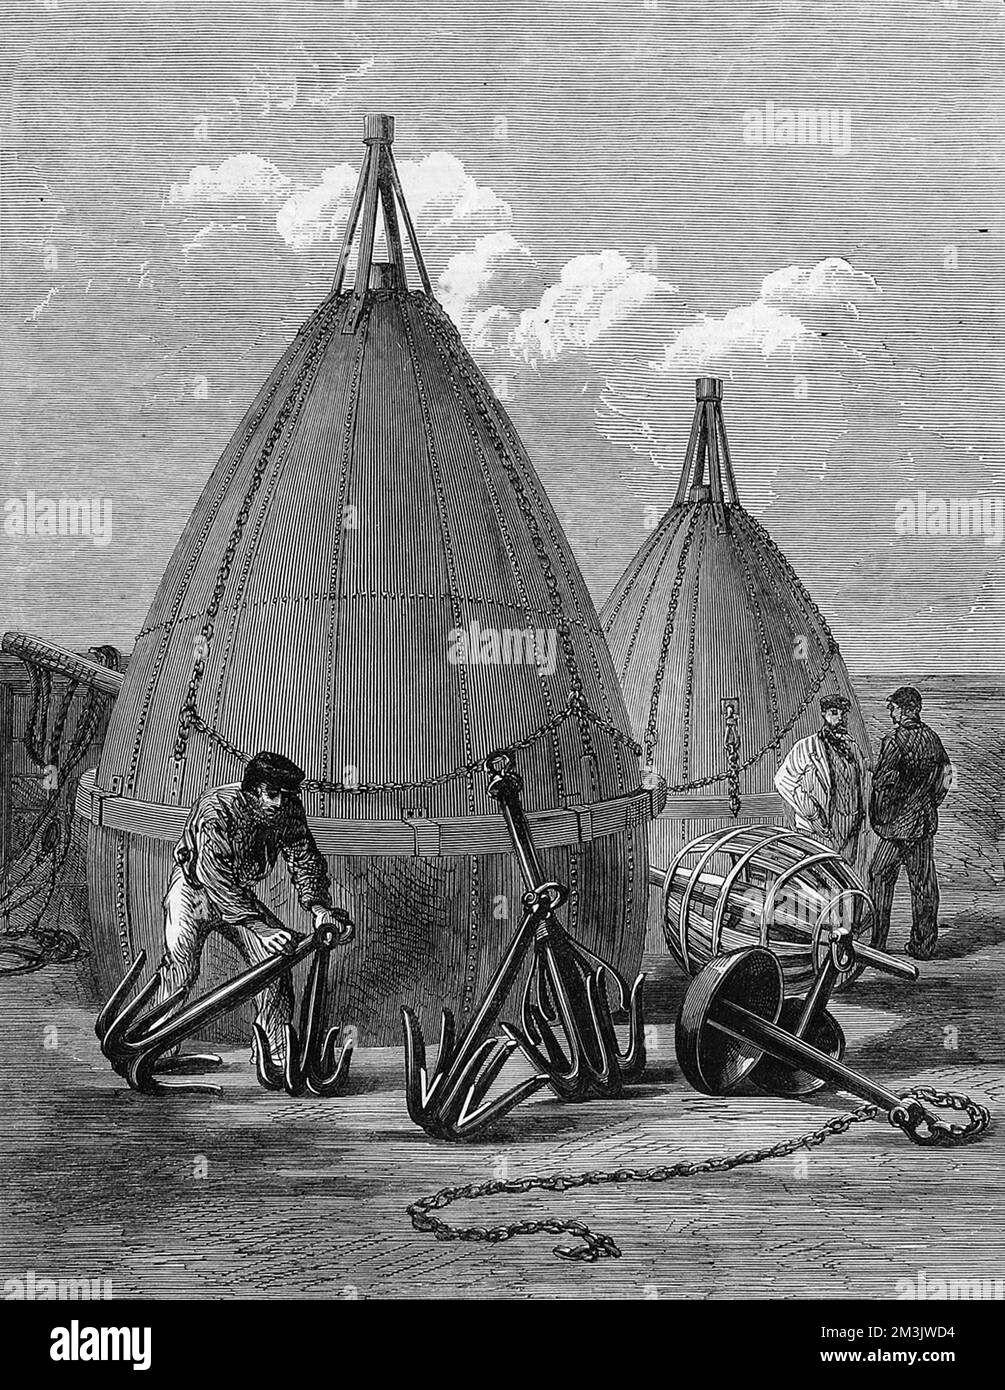 The buoys and grapnels that were used to recover an Atlantic Telegraph Cable, September. The telegraph cable, which was laid in 1865 by the 'Great Eastern', broke in 1866 and was therefore pulled up from the ocean bed with the grapnels, mended and repositioned.  1866 Stock Photo